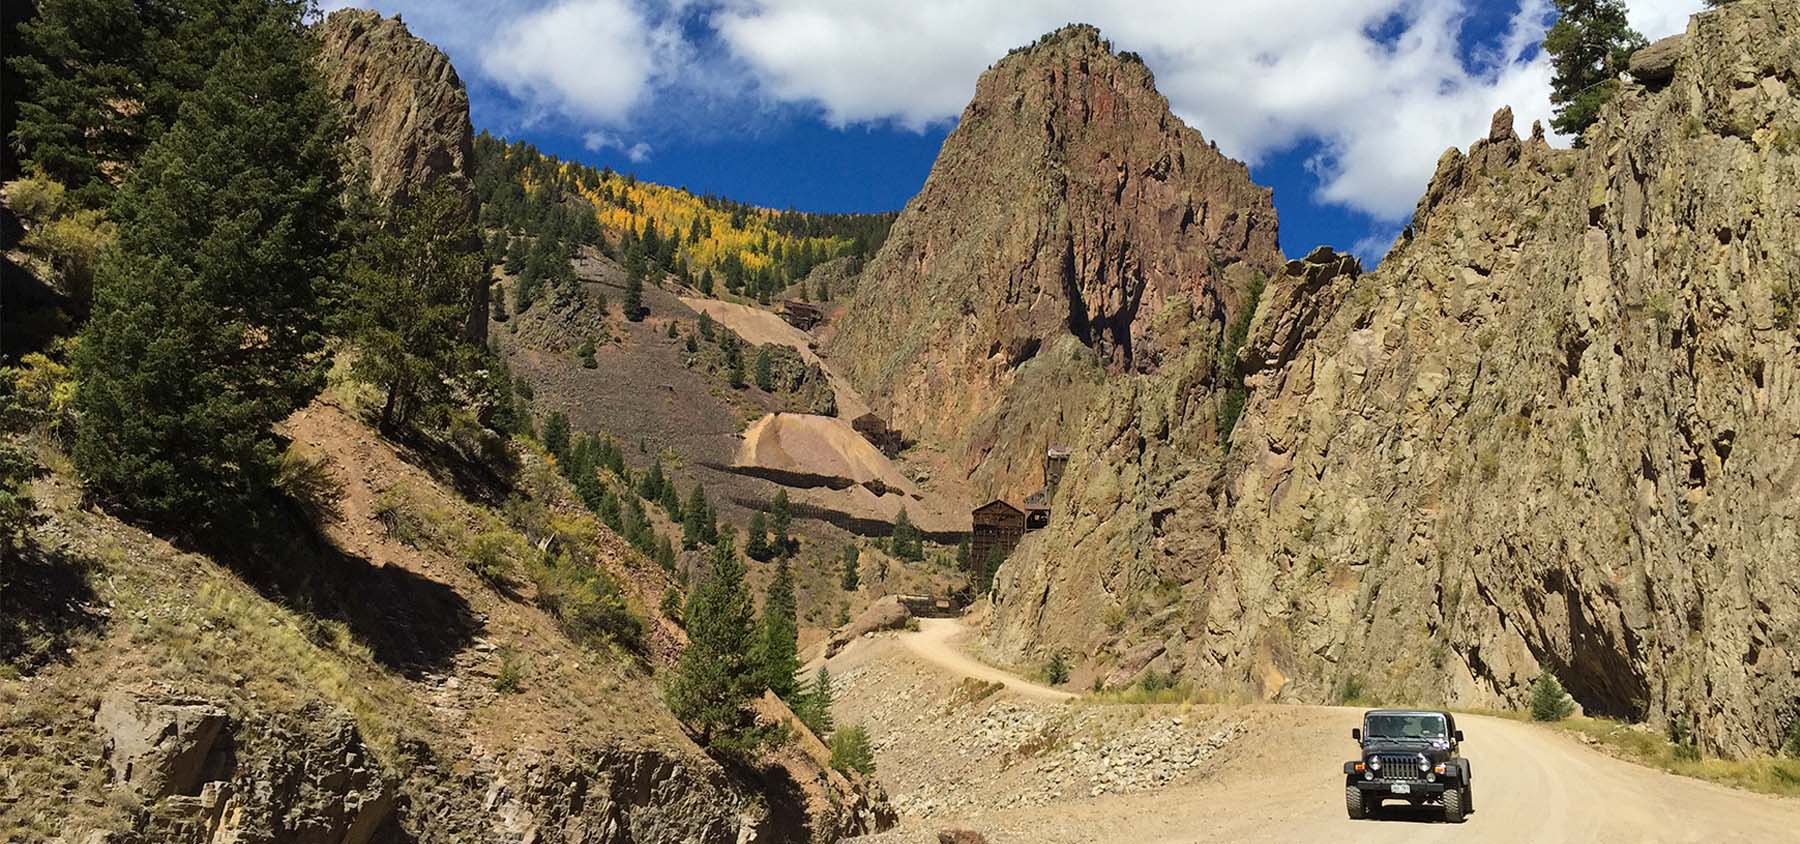 Bachelor Loop Tour and Commodore Mines near Creede, CO